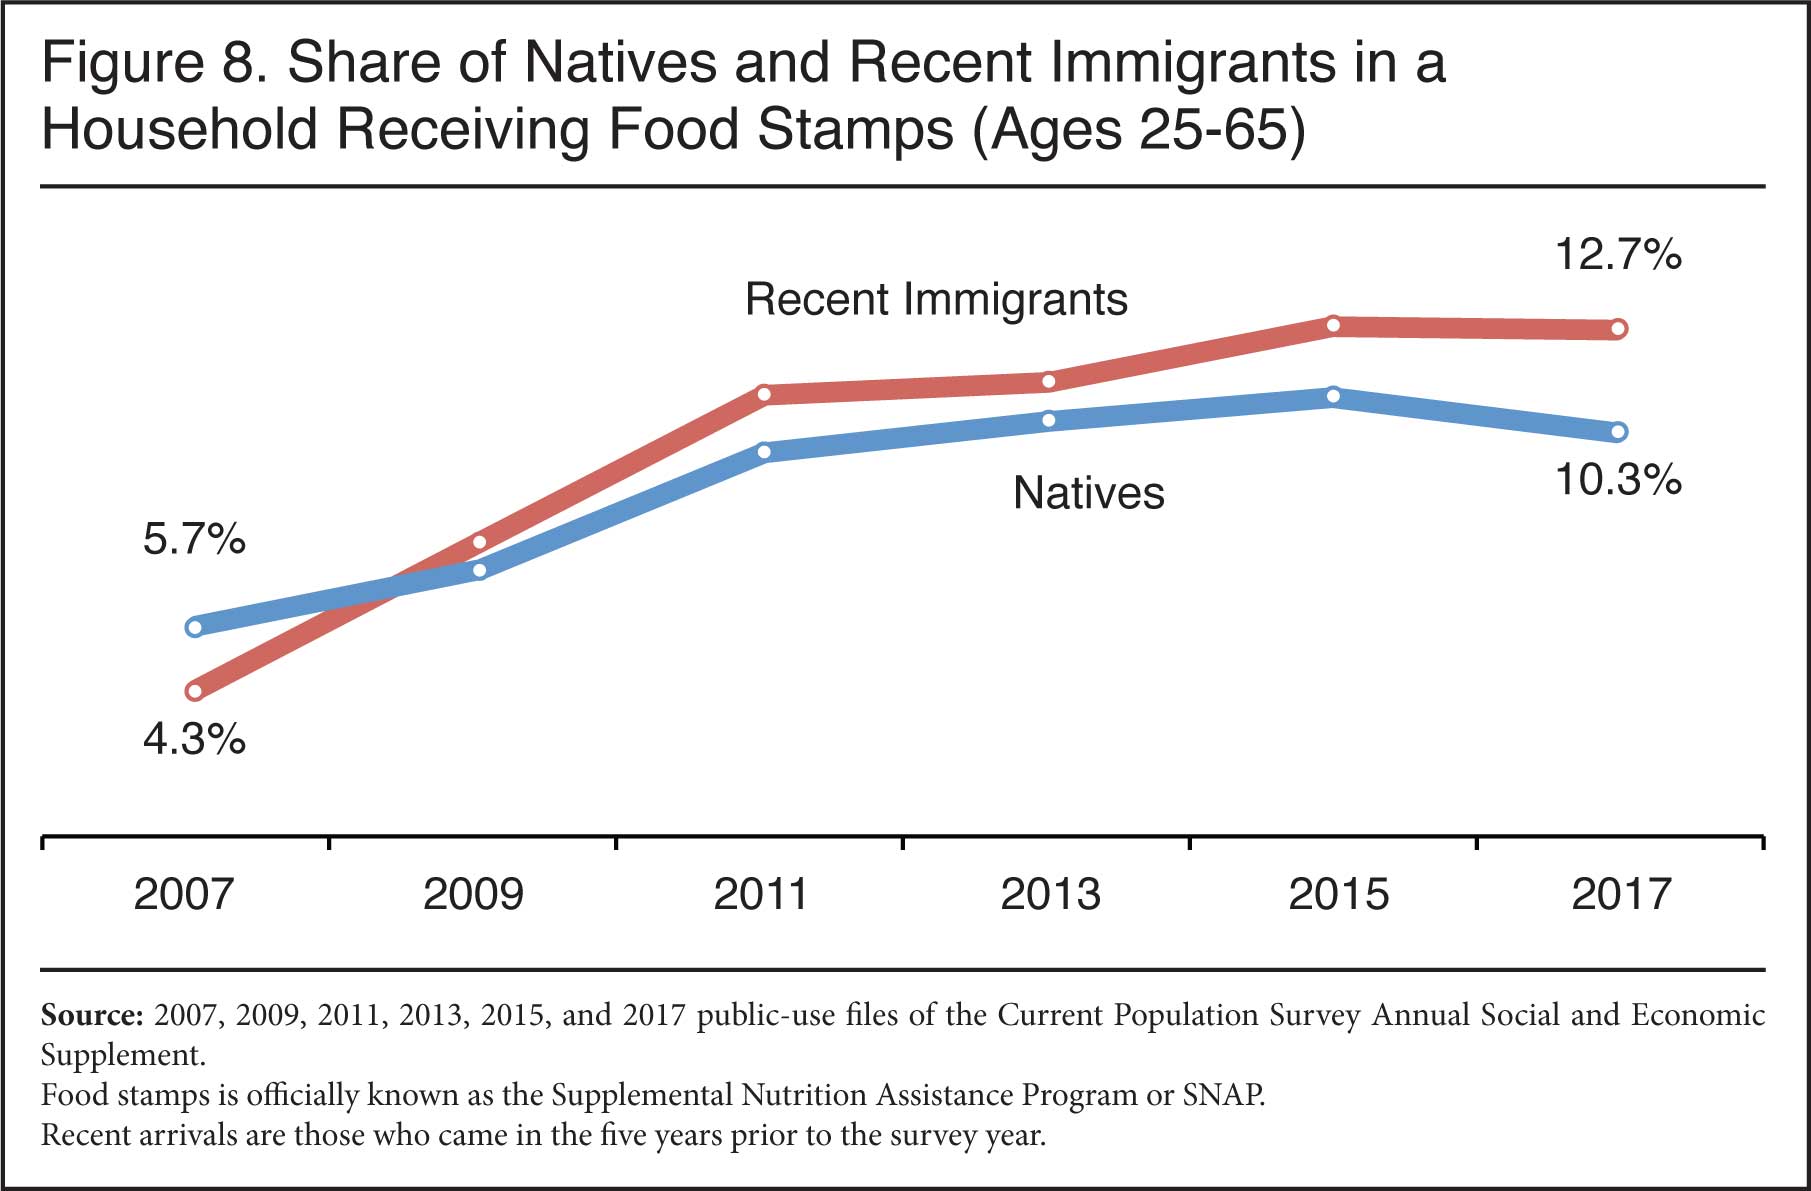 Graph: Share of Natives and Recent Immigrants in a Household Receiving Food Stamps, 2007 -2017